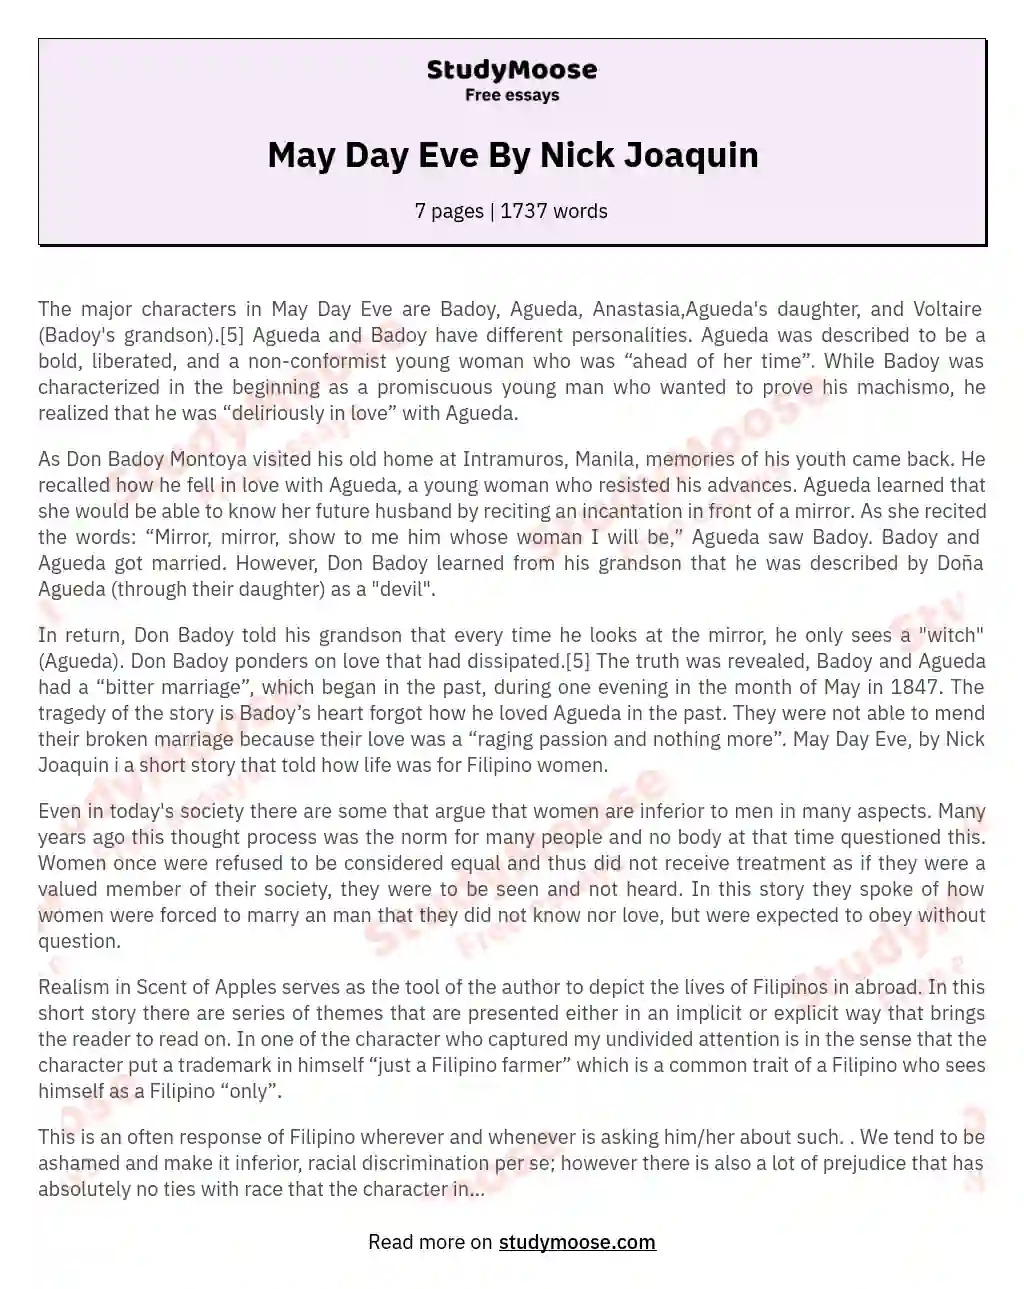 May Day Eve By Nick Joaquin essay